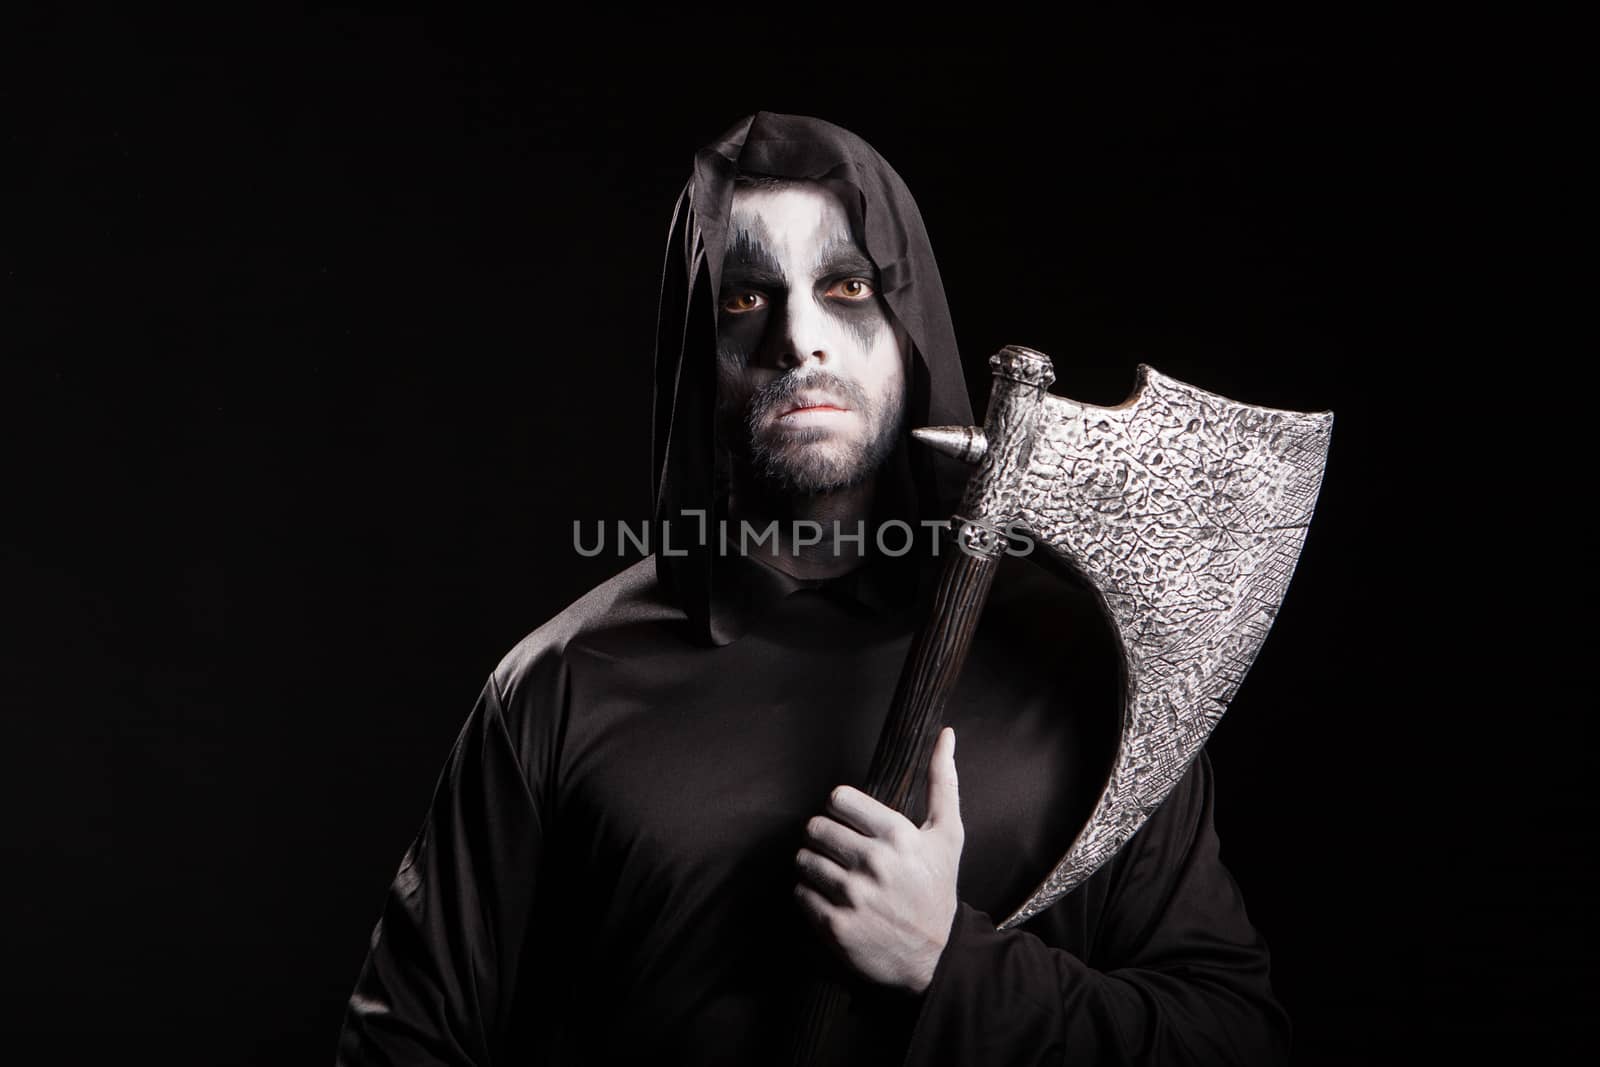 Evil grim reaper with an axe over black background for halloween.